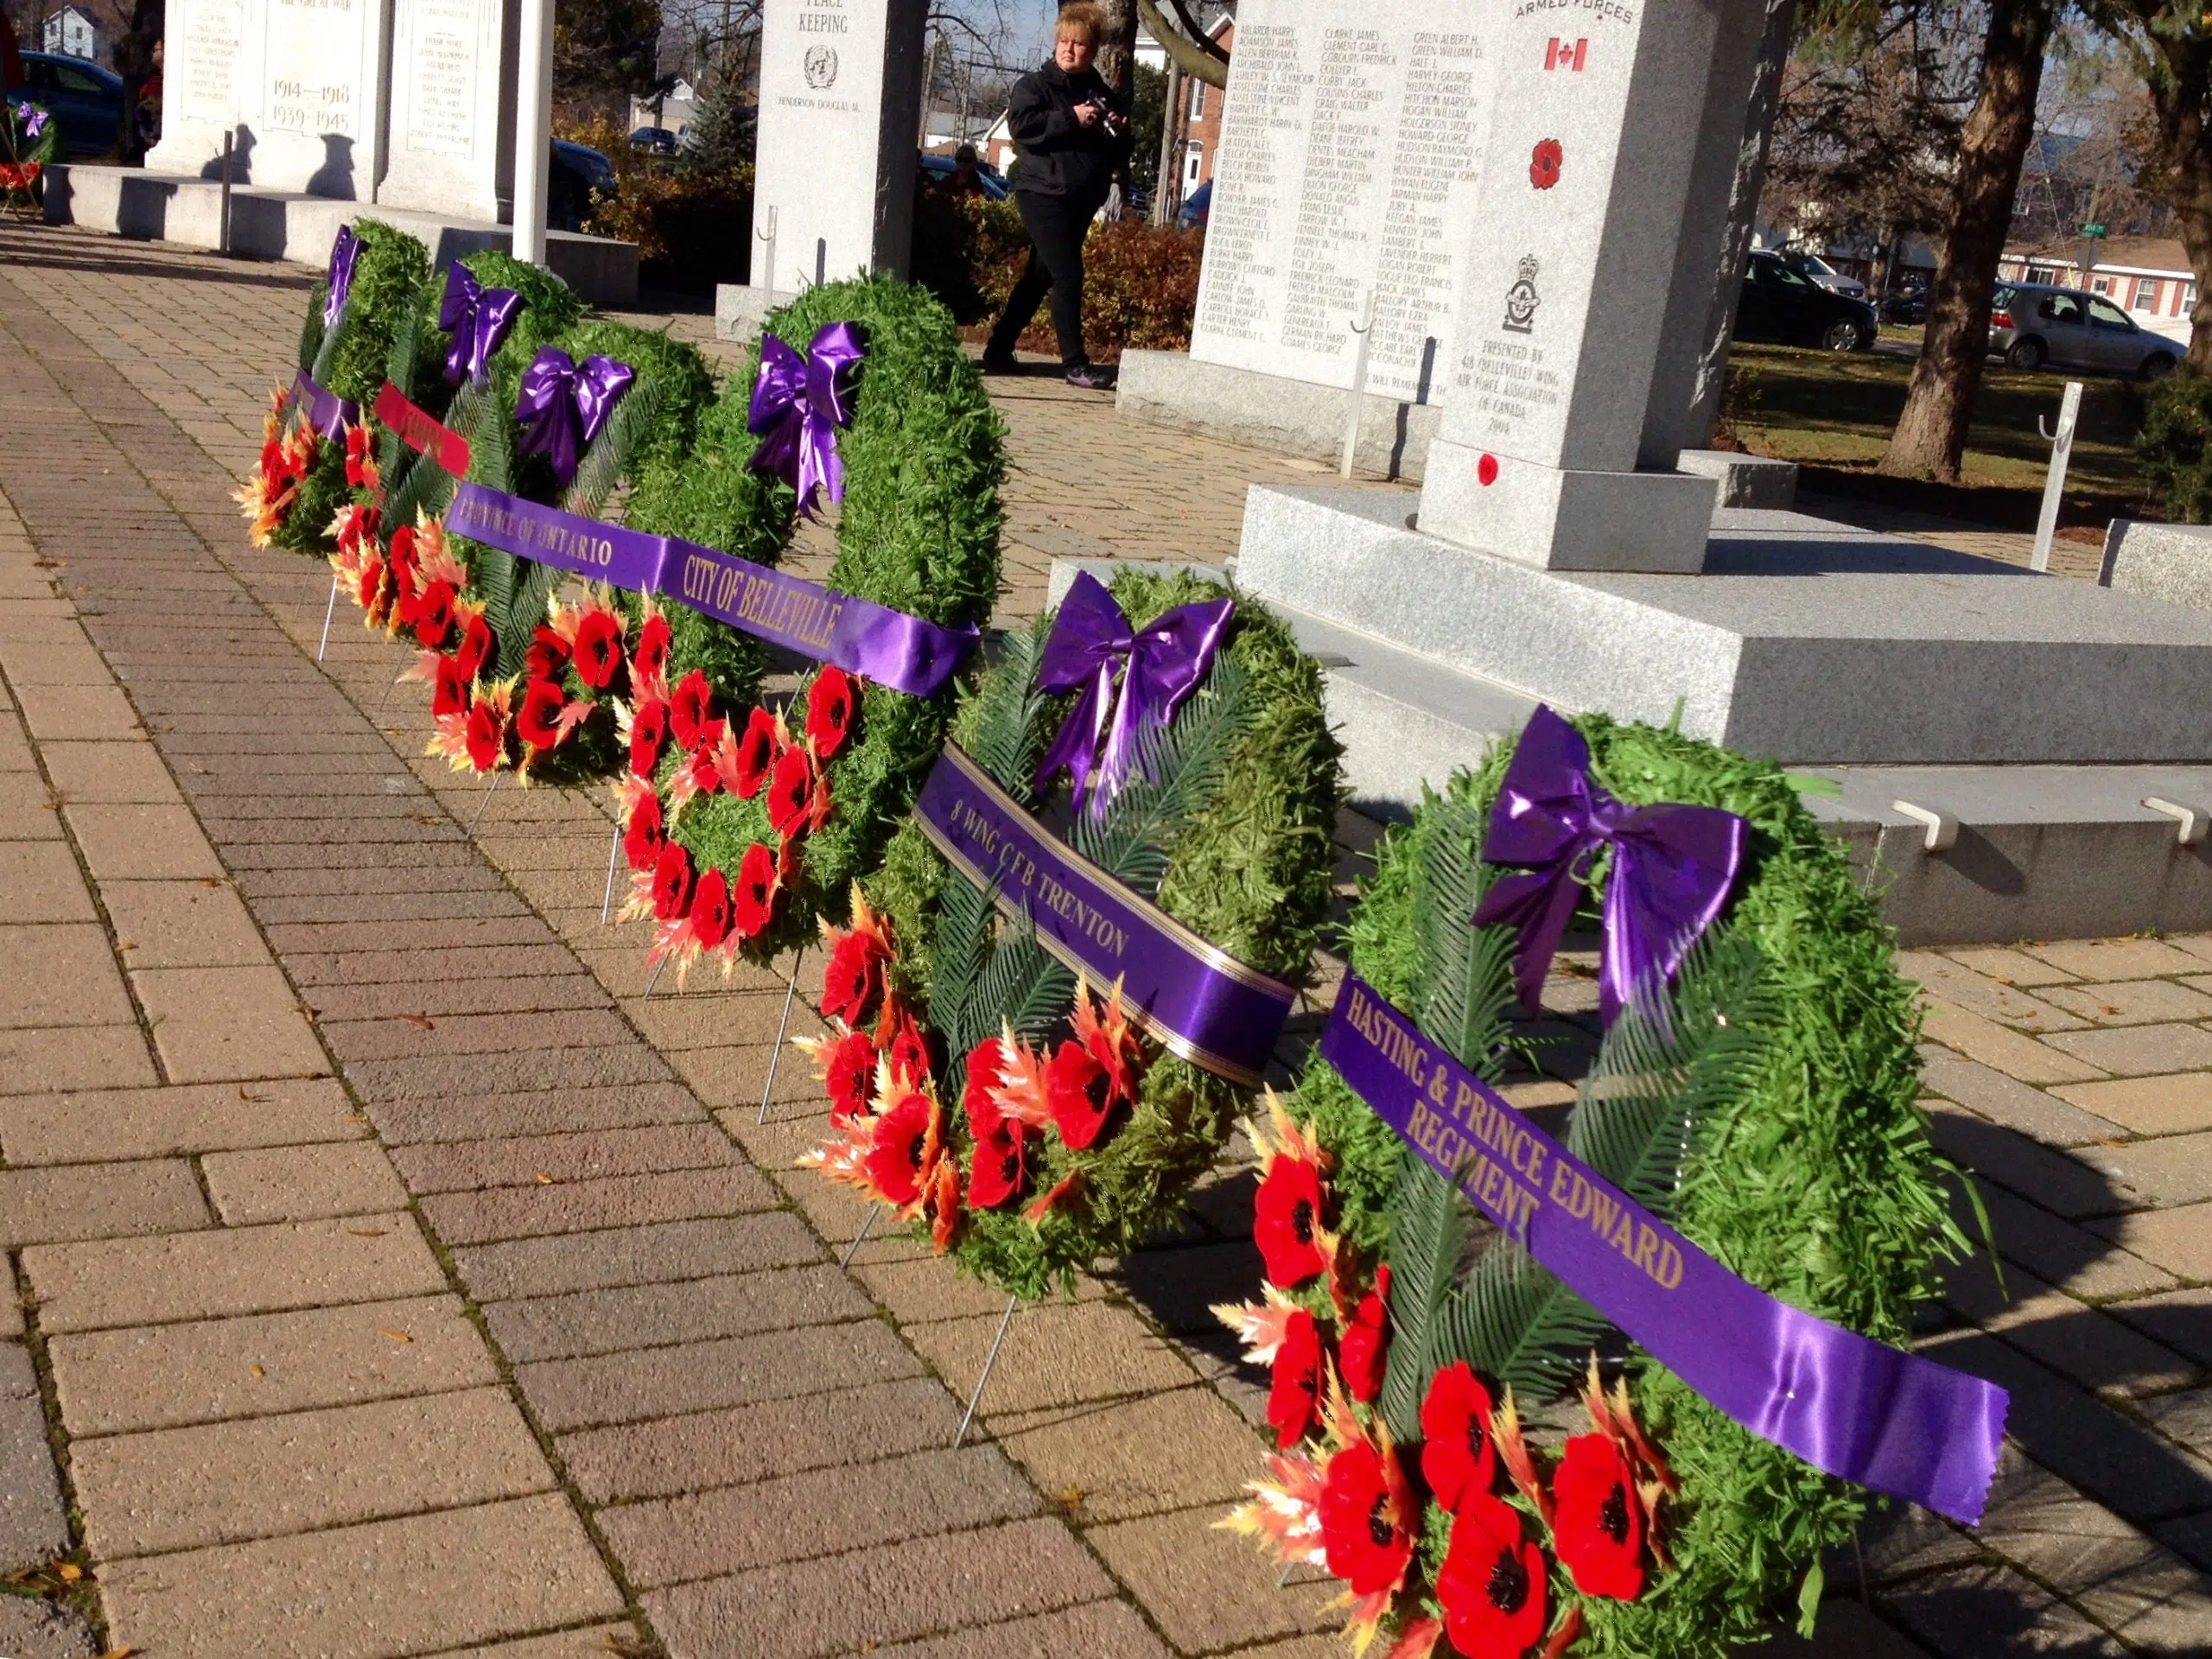 Marking Remembrance Day in Belleville